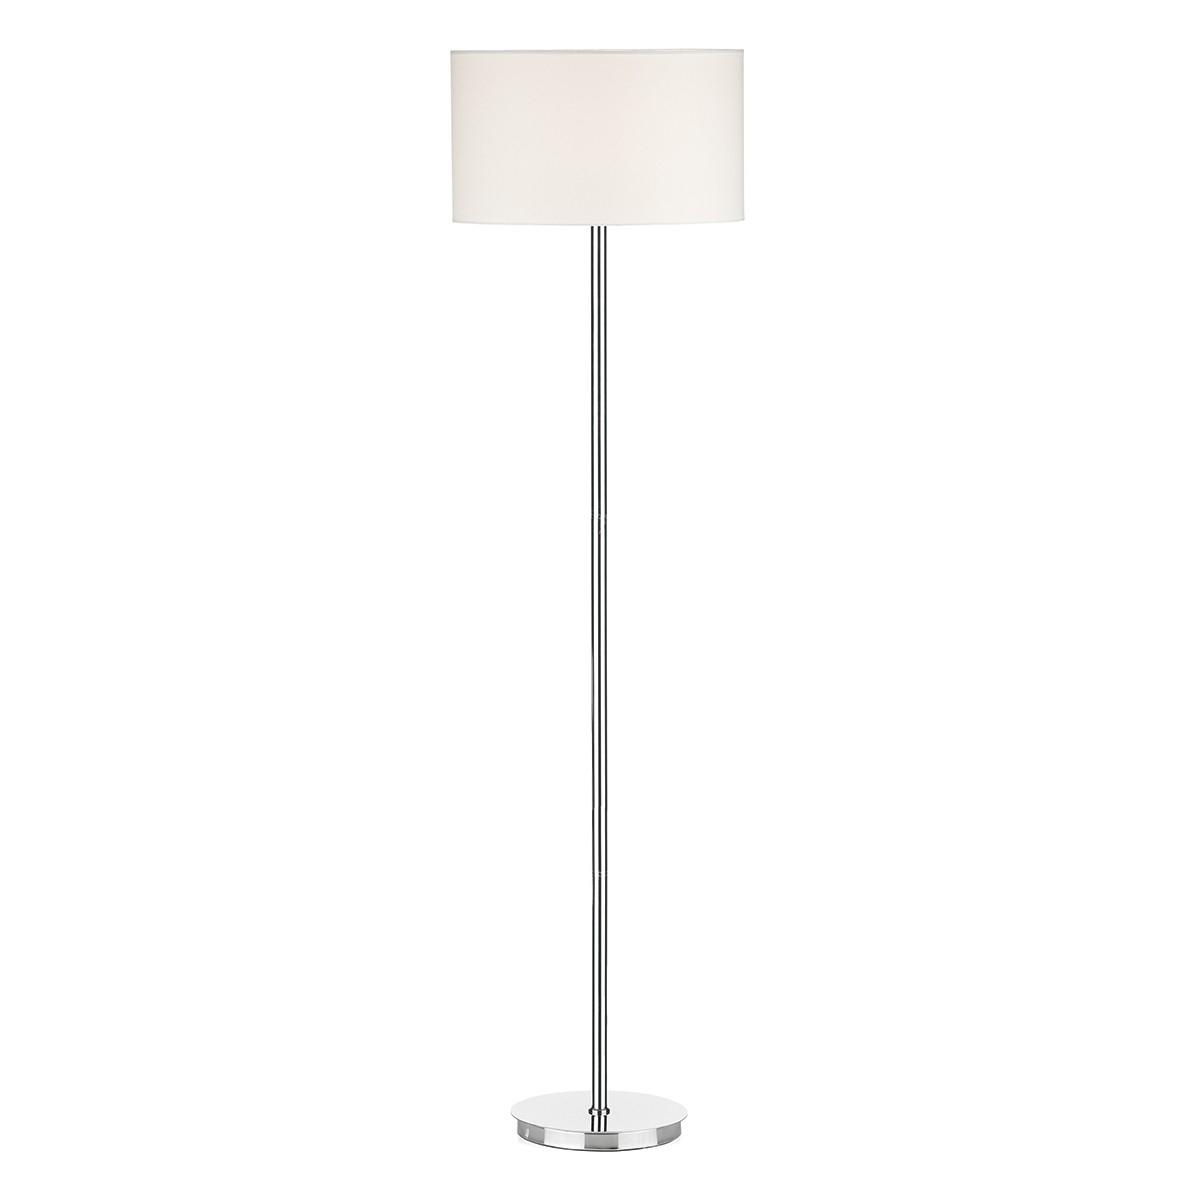 Dr Tus4950 Tuscan Floor Lamp Base Only Polished Chrome intended for dimensions 1200 X 1200